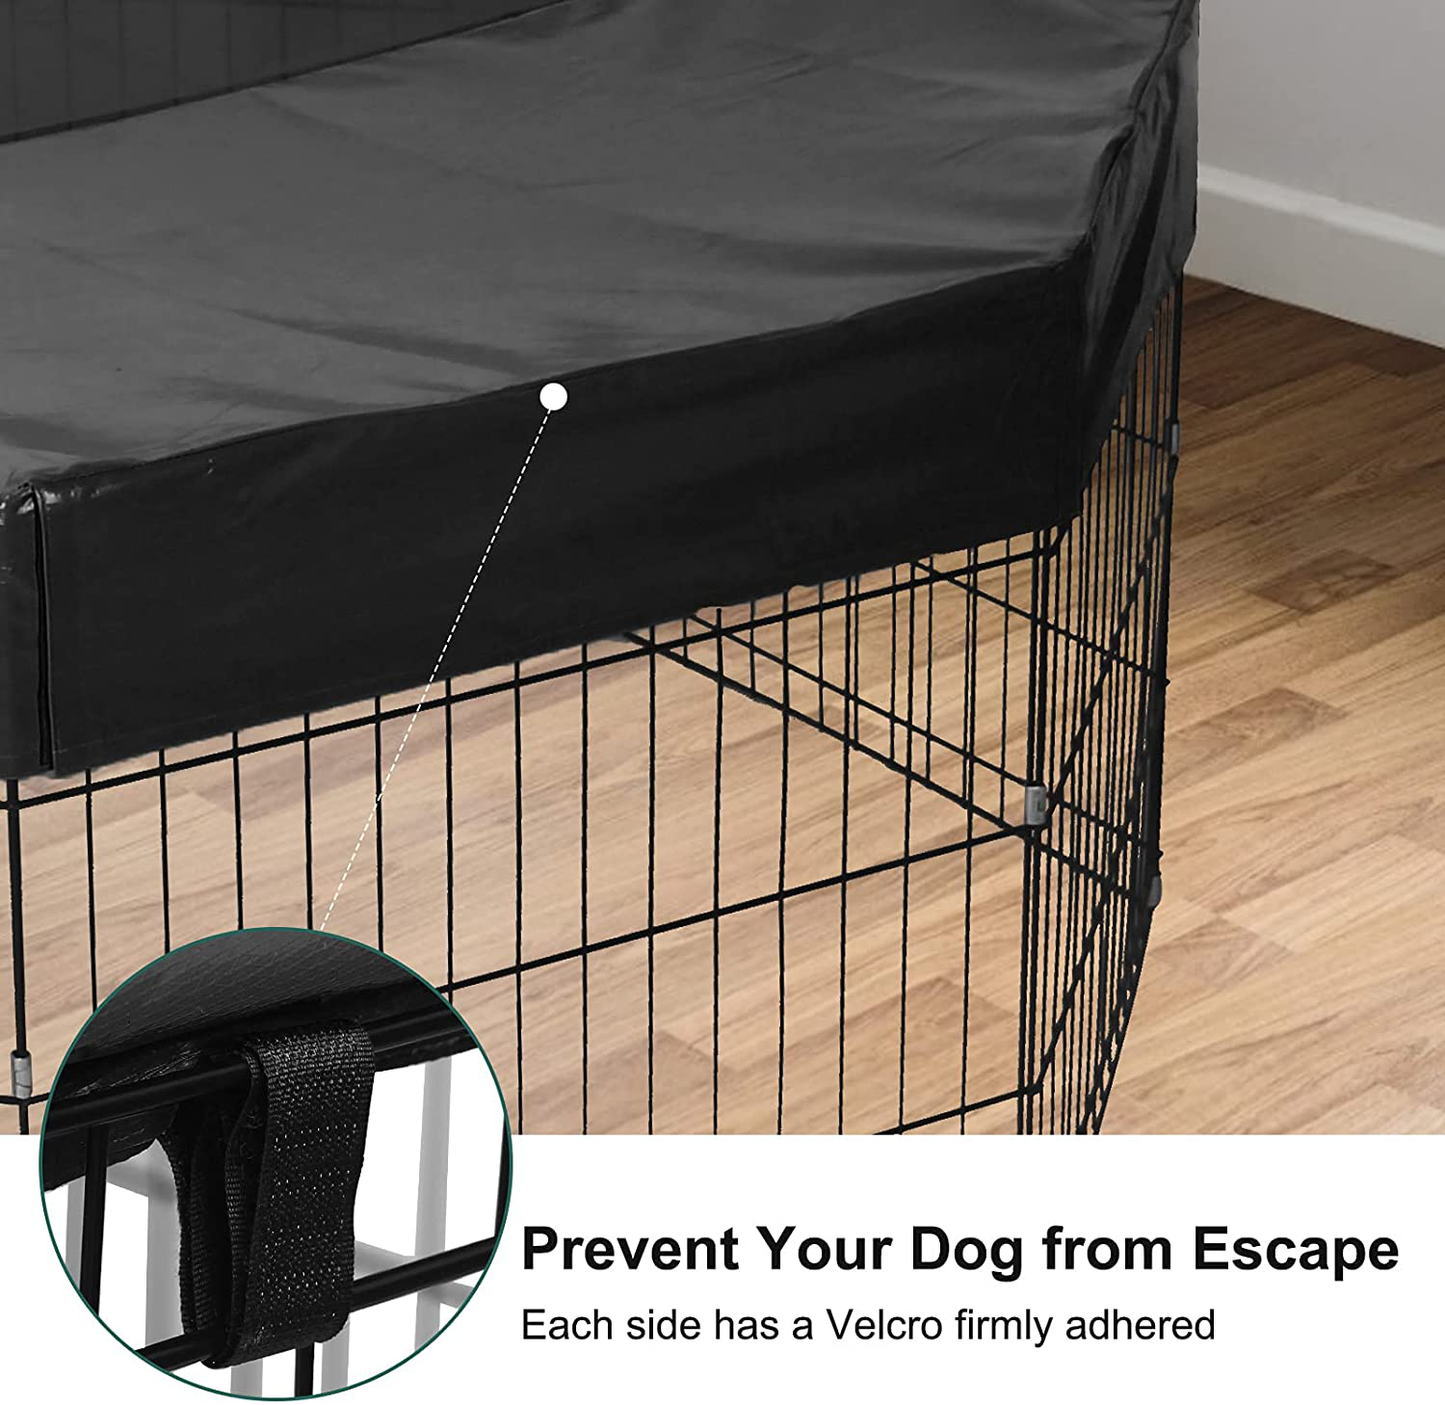 GORUTIN Dog Playpen Cover, Pet Playpen Mesh Top Cover Protect Dog from Sun/Rain Prevent Escape, Dog Pen Cover Shaded Area Indoor Outdoor Fits 24 Inch 8 Panels Playpen (Sell Top Cover Only!) Animals & Pet Supplies > Pet Supplies > Dog Supplies > Dog Kennels & Runs GORUTIN   